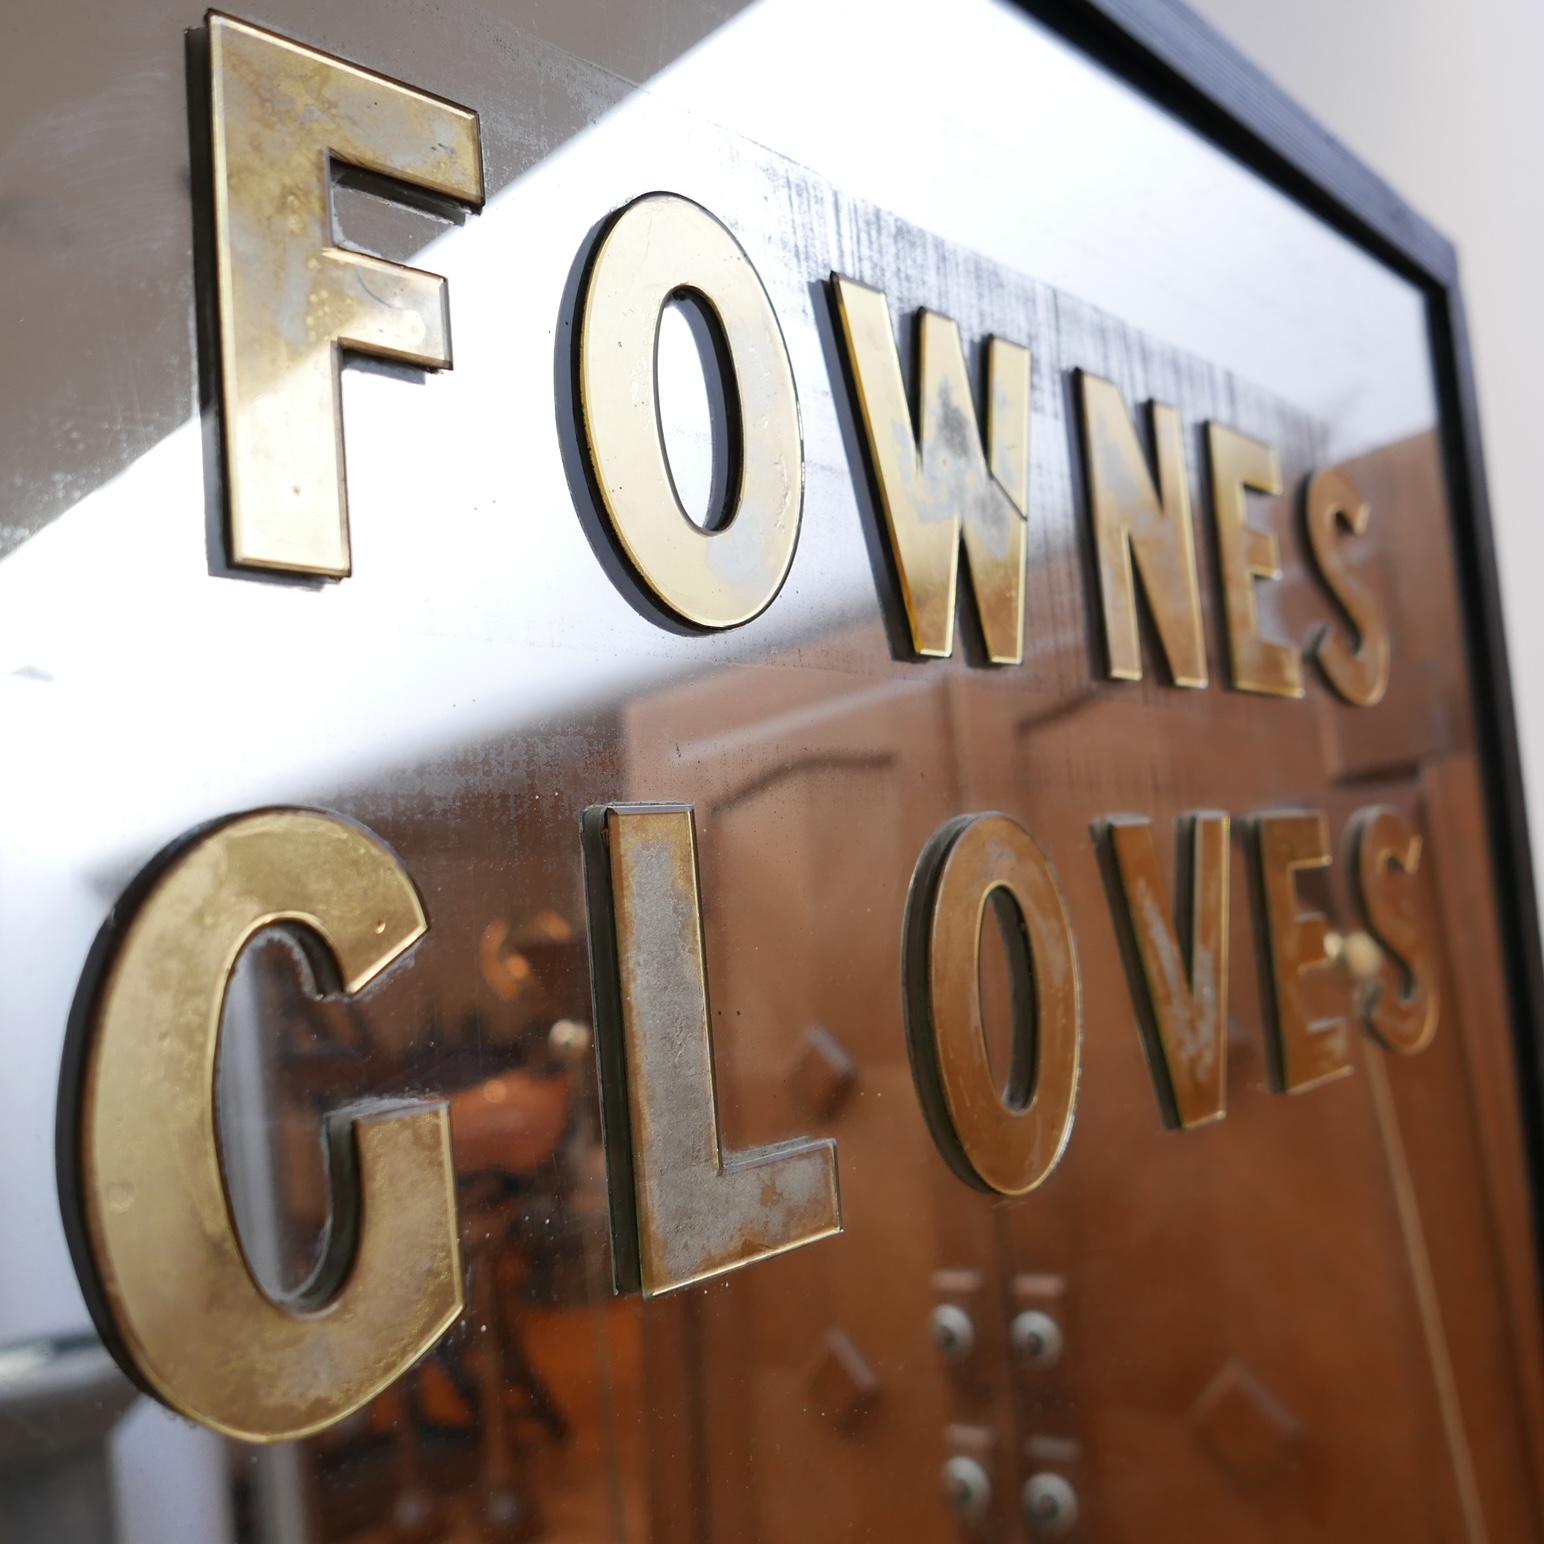 A scarce advertising mirror for 'Fownes Gloves'. 

A company that was established in England in 1777, and still operates in America today. 

England, c1950s, perhaps earlier. 

Reeded wooden frame with later black painting. 

Original mirror